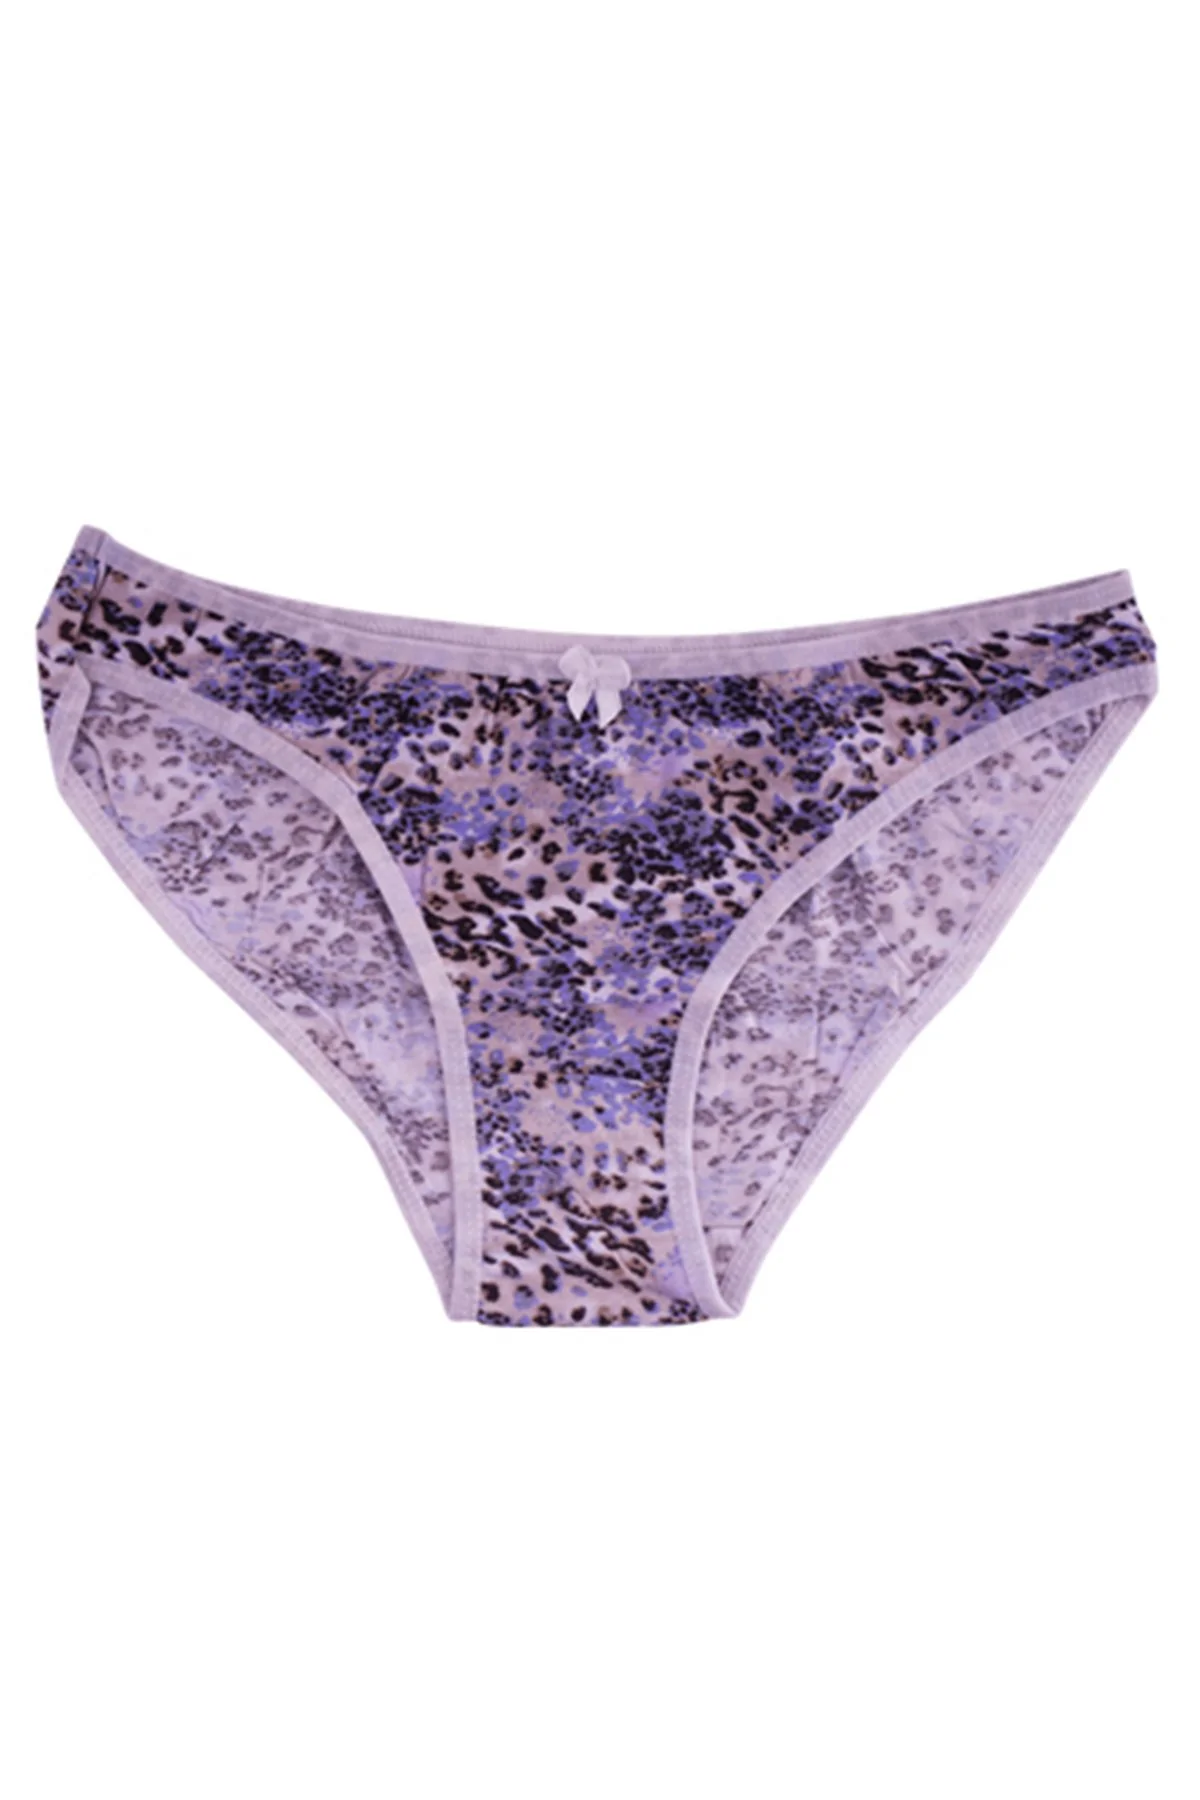 Bls - Frankie Cotton And Elastane Panty Grey Lace –